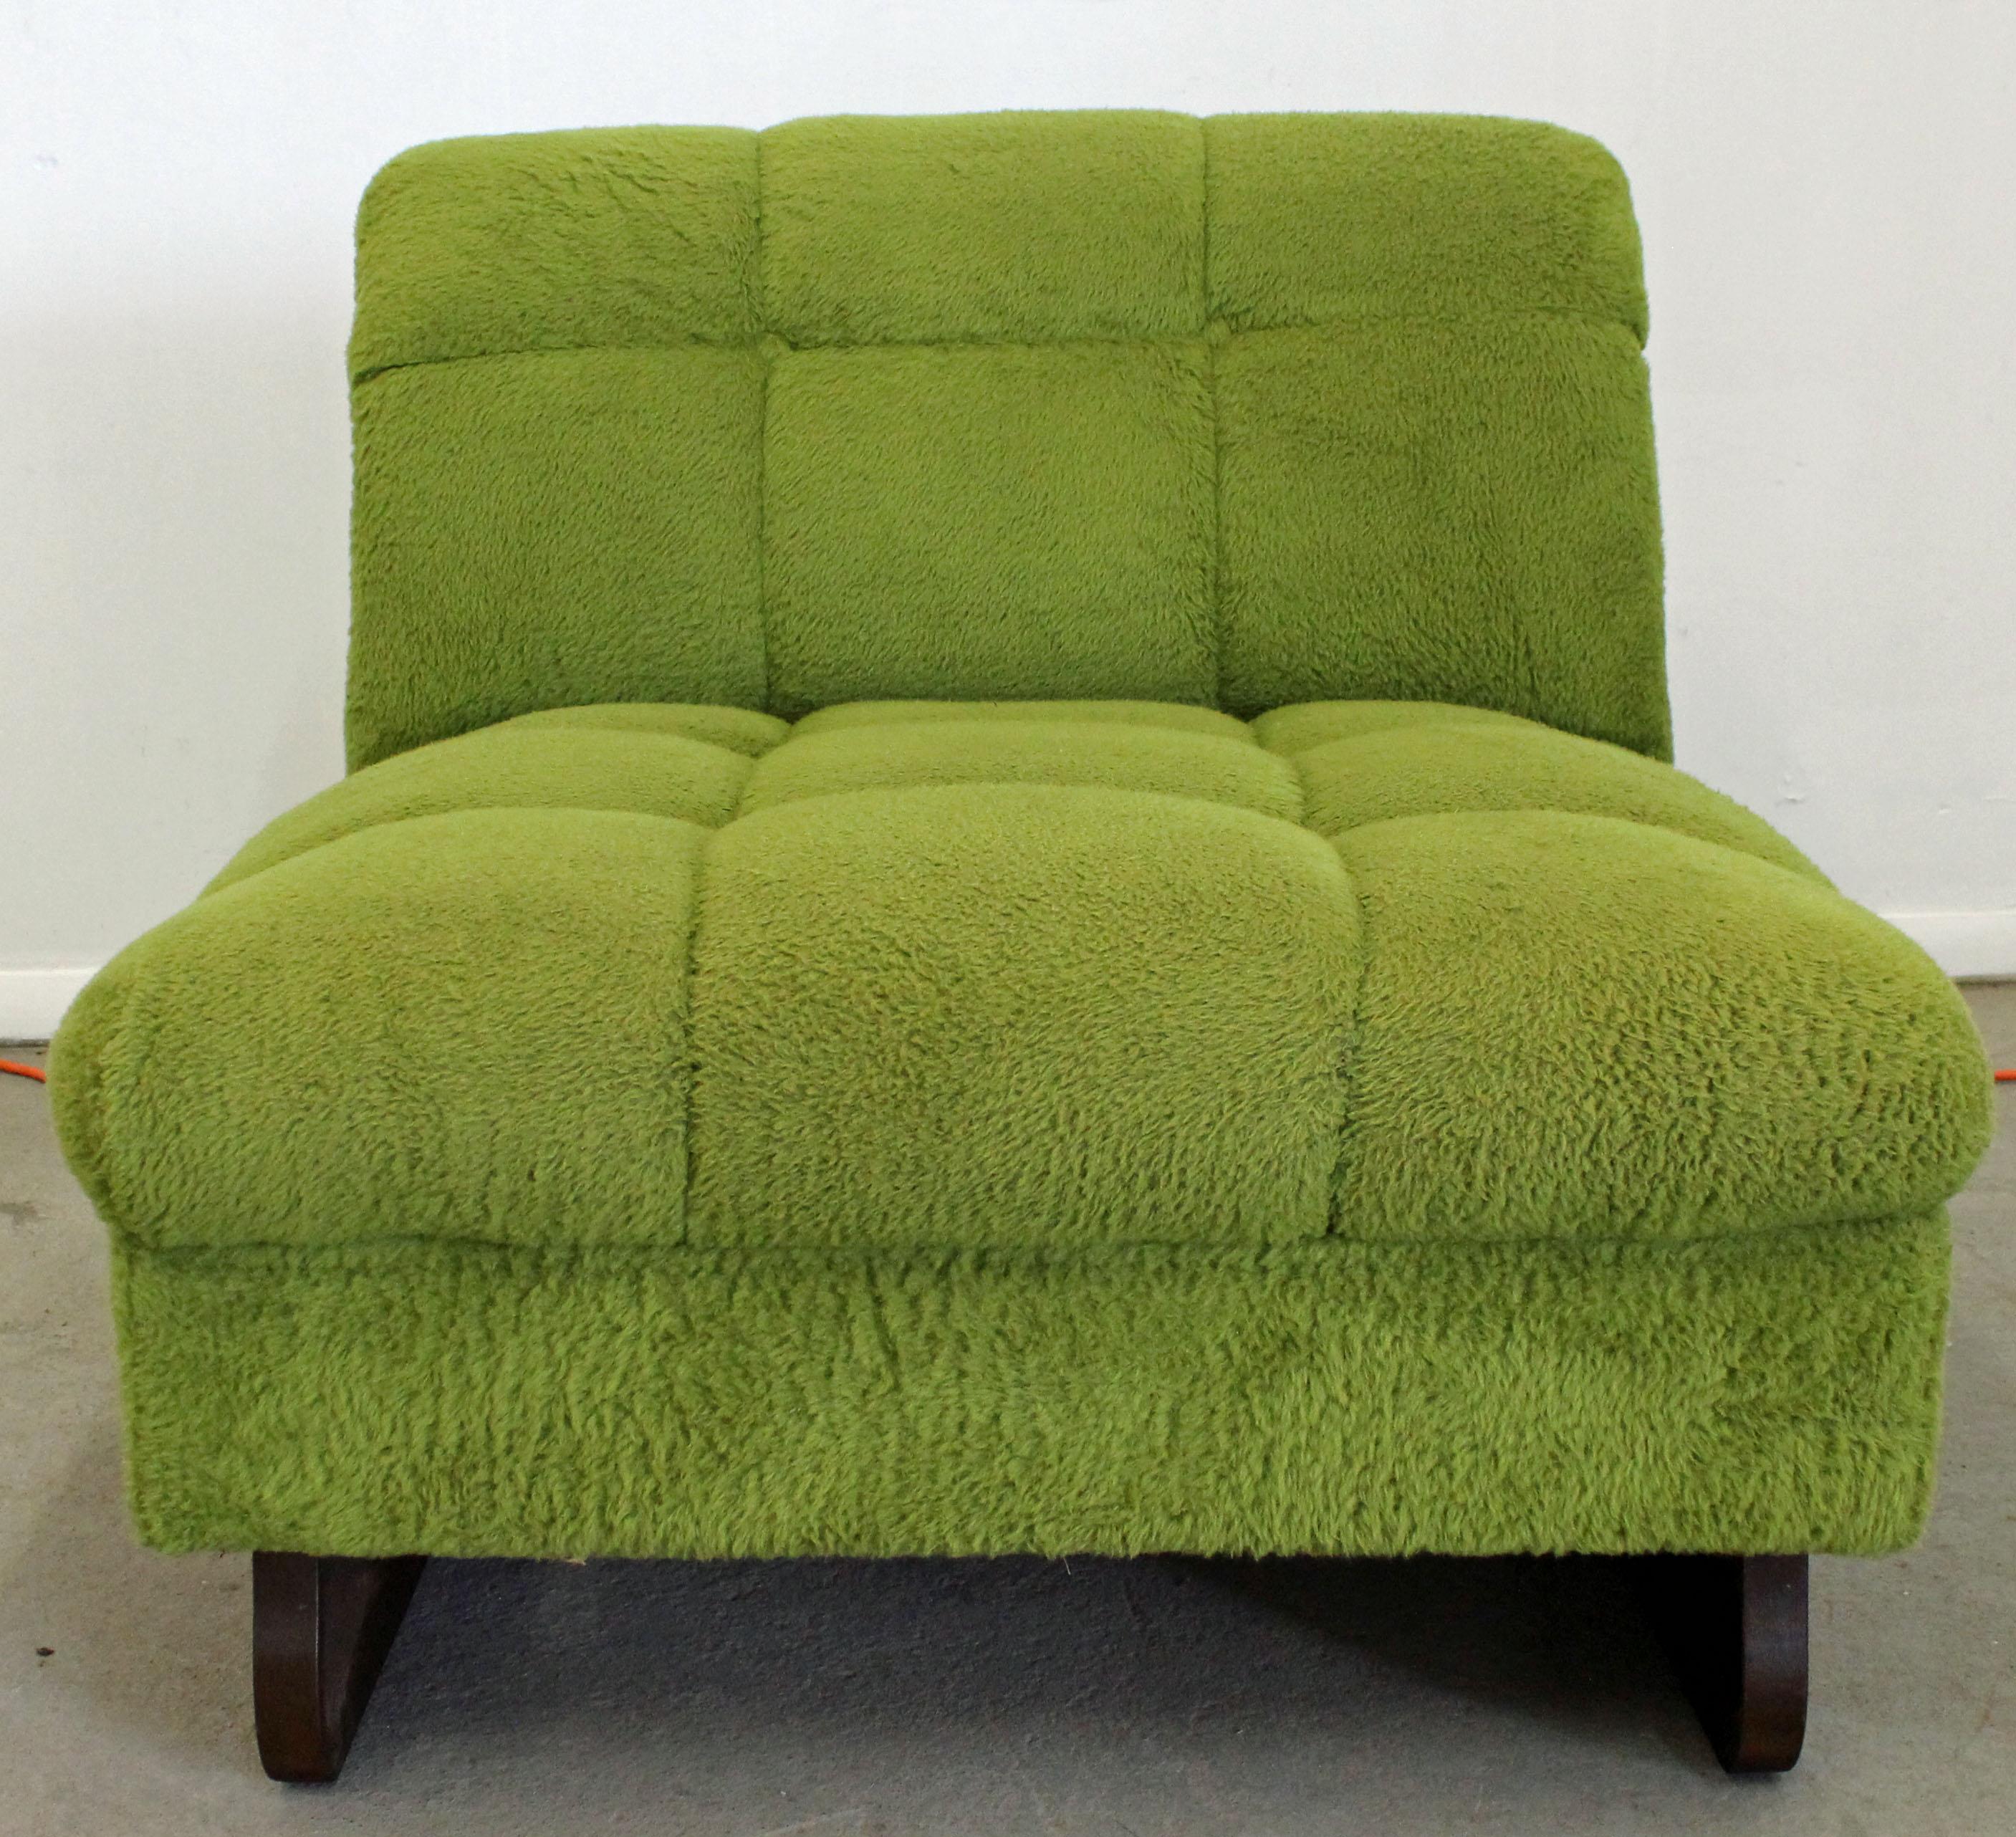 Offered is a vintage Mid-Century Modern slipper chair with green upholstery and sculpted walnut legs. It is in decent vintage condition, has some age wear. Can stand to be reupholstered. It is not signed.

Approximate dimensions:
30